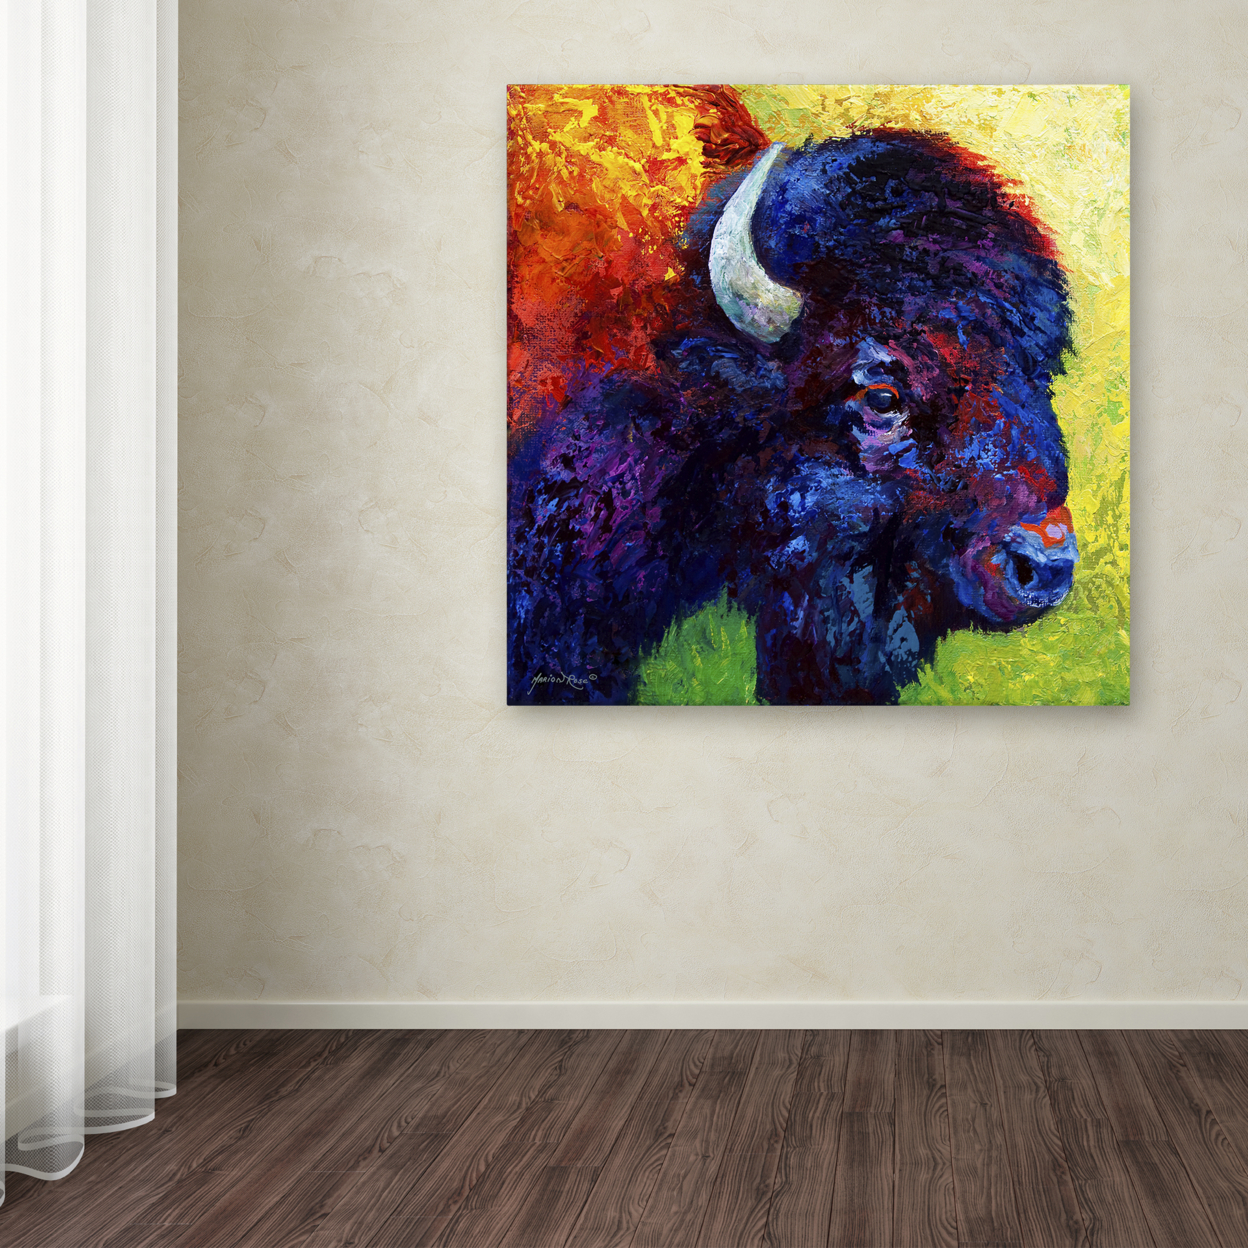 Marion Rose 'Bison Head III' Ready To Hang Canvas Art 35 X 35 Inches Made In USA